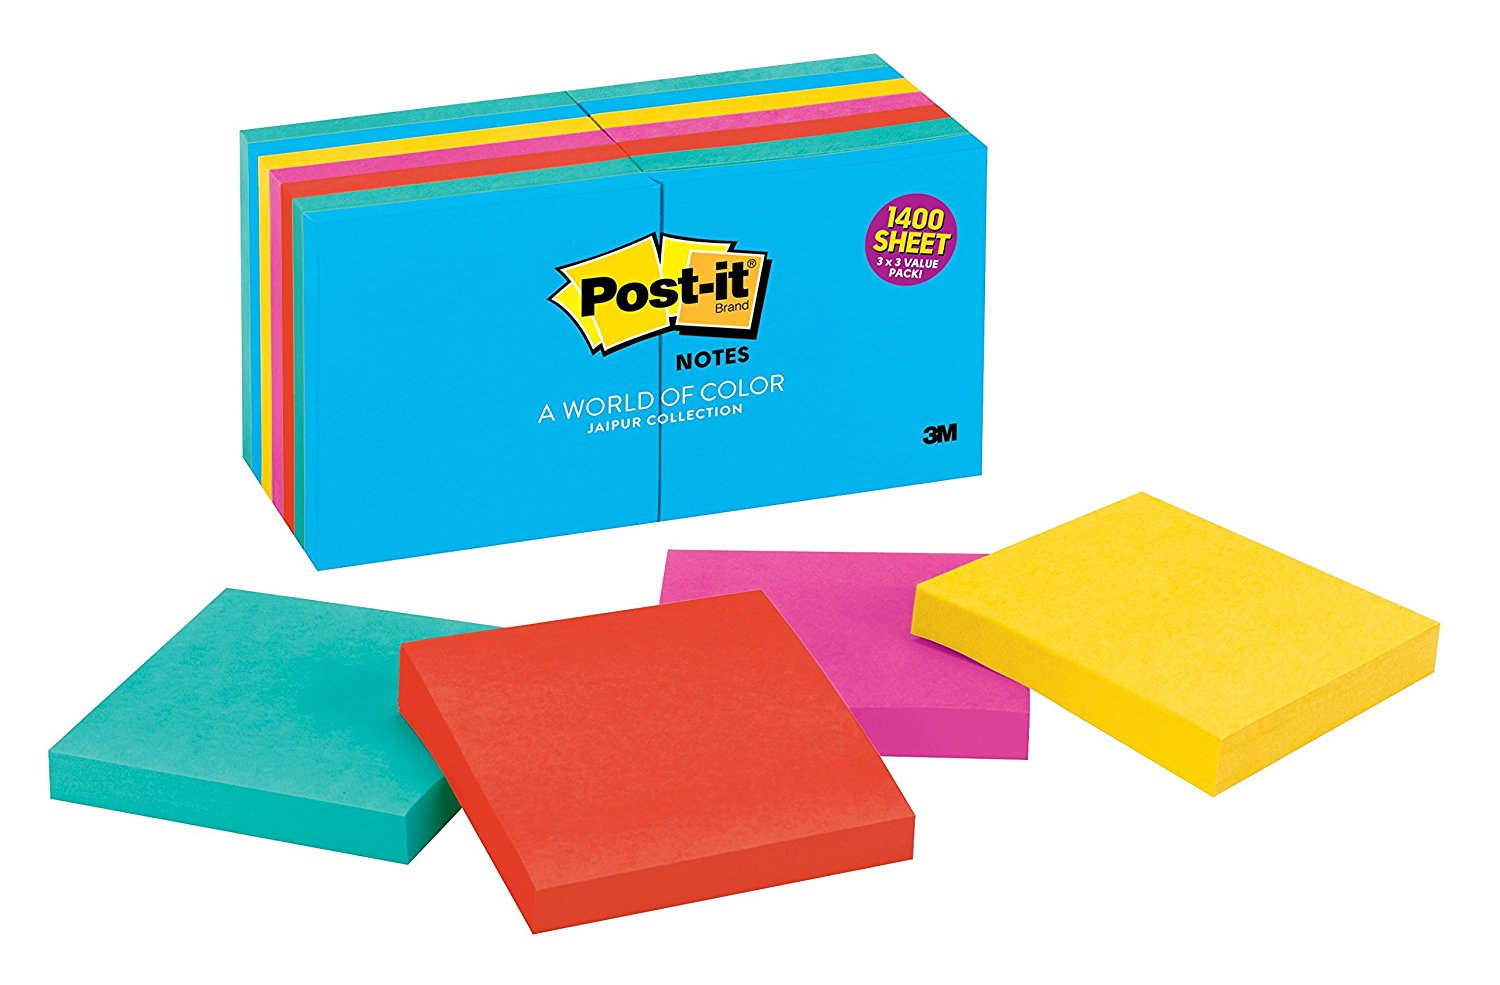 Amazon.com : Post-it Notes, 3 in x 3 in, Jaipur Collection, 14 ...